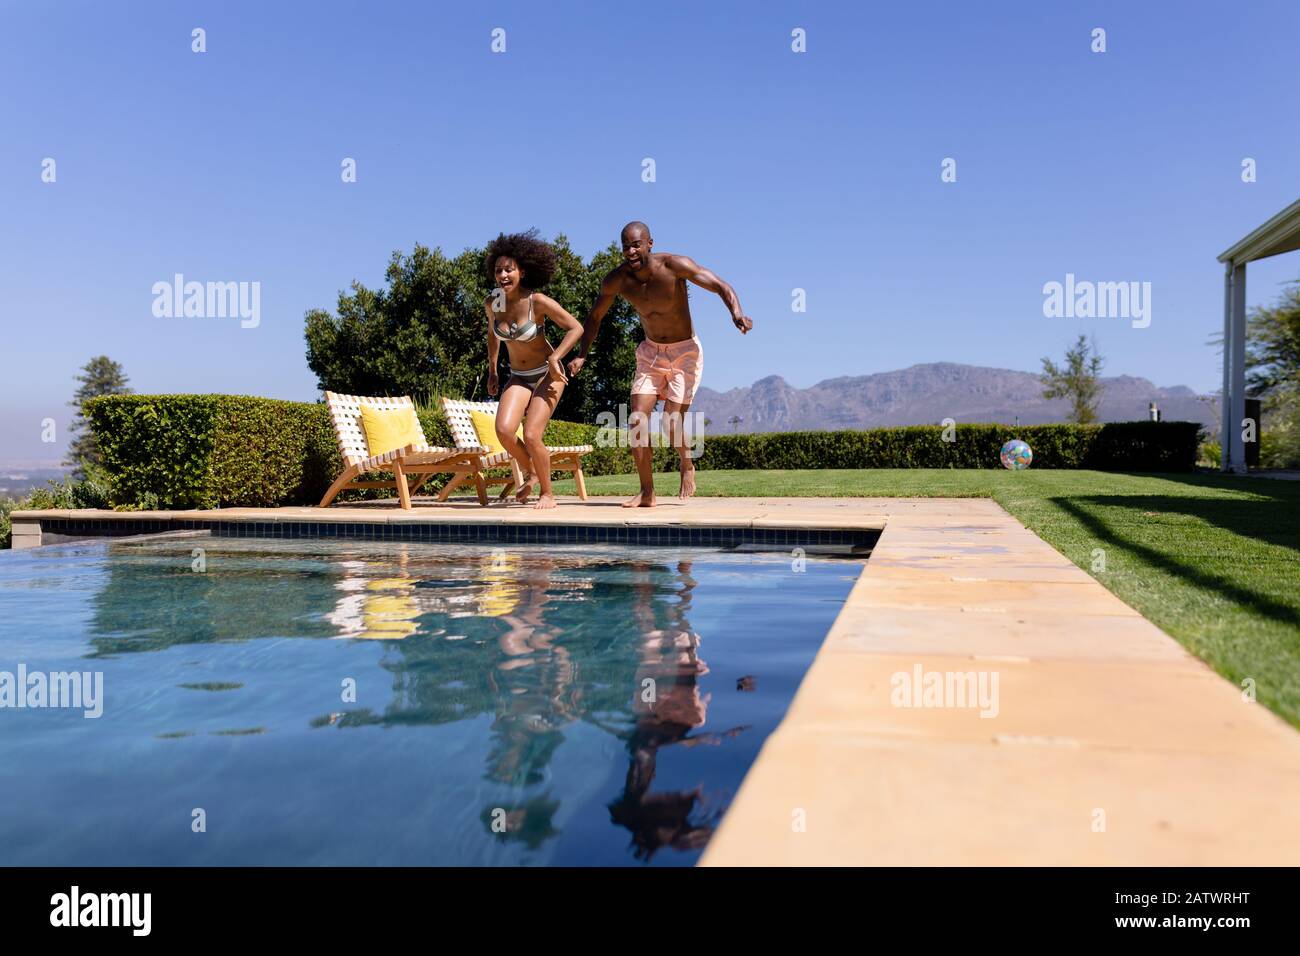 Young couple jumping on swimming pool on a sunny day Stock Photo